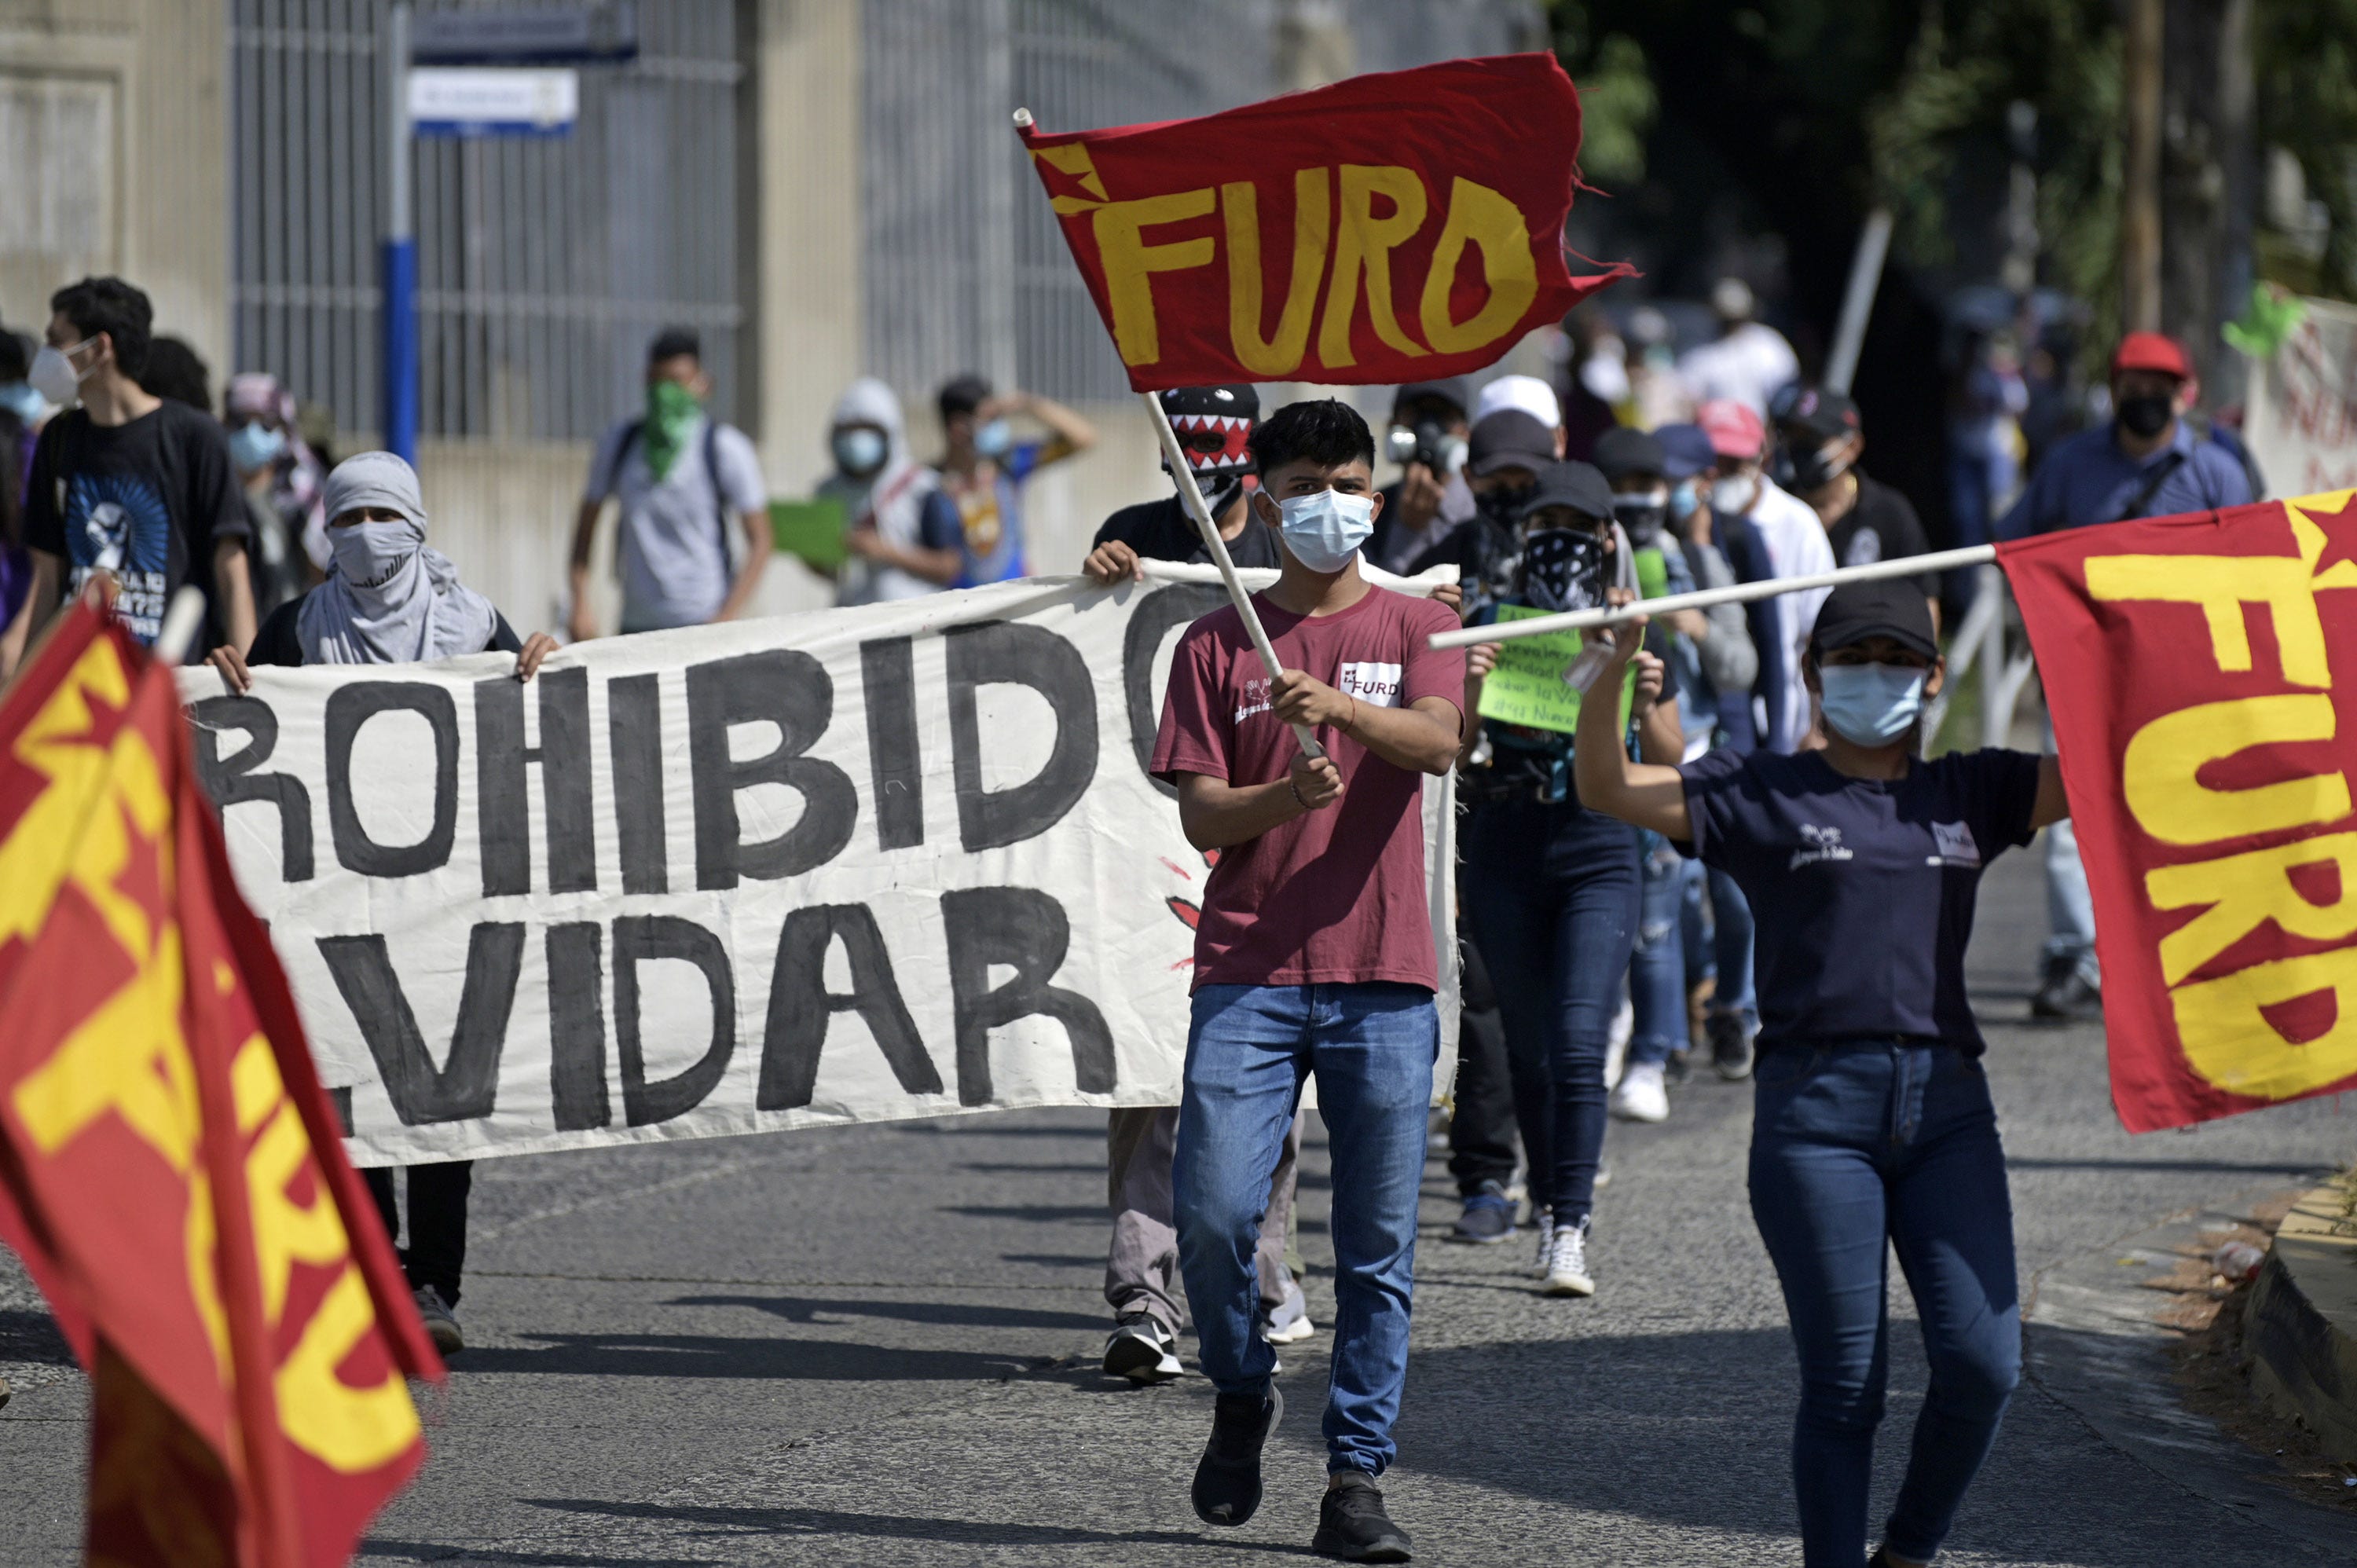 Students from the University of El Salvador rally against Salvadoran President Nayib Bukele in February, a year after a military incursion into the Legislative Assembly in San Salvador.